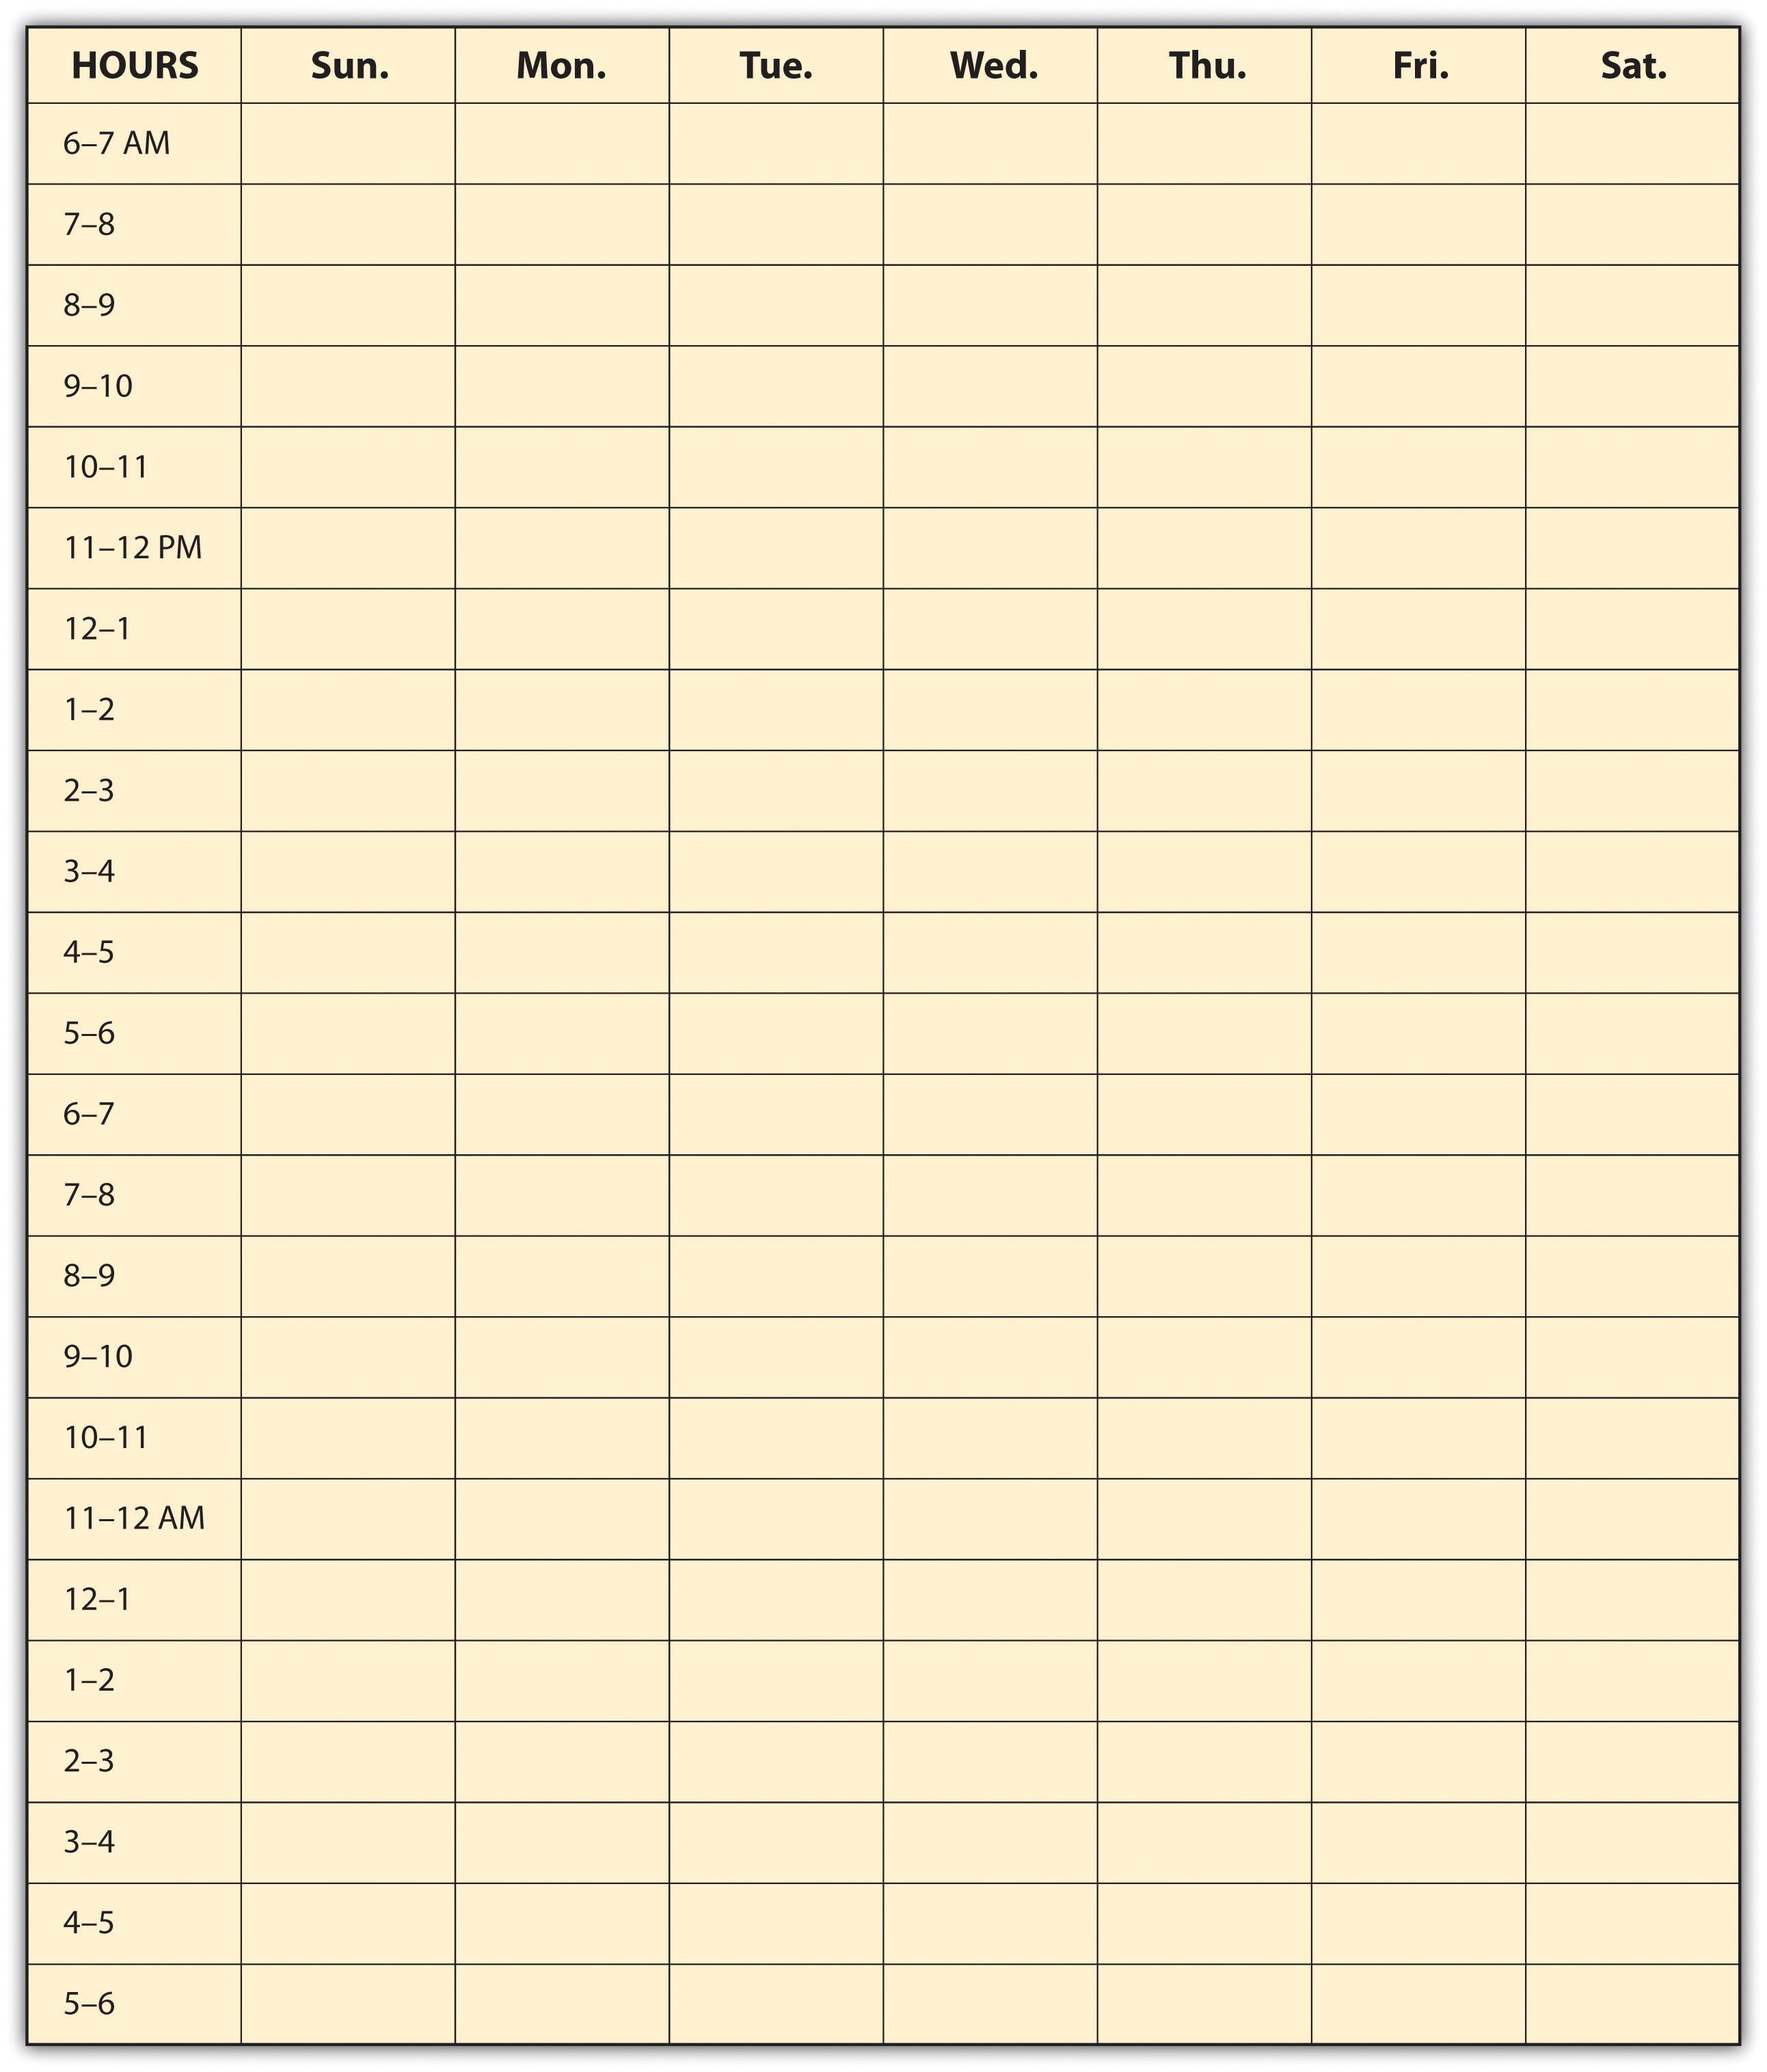 Day Planner With Time Slots Printable Weekly Calendar With in Planner With 15 Minute Time Slots